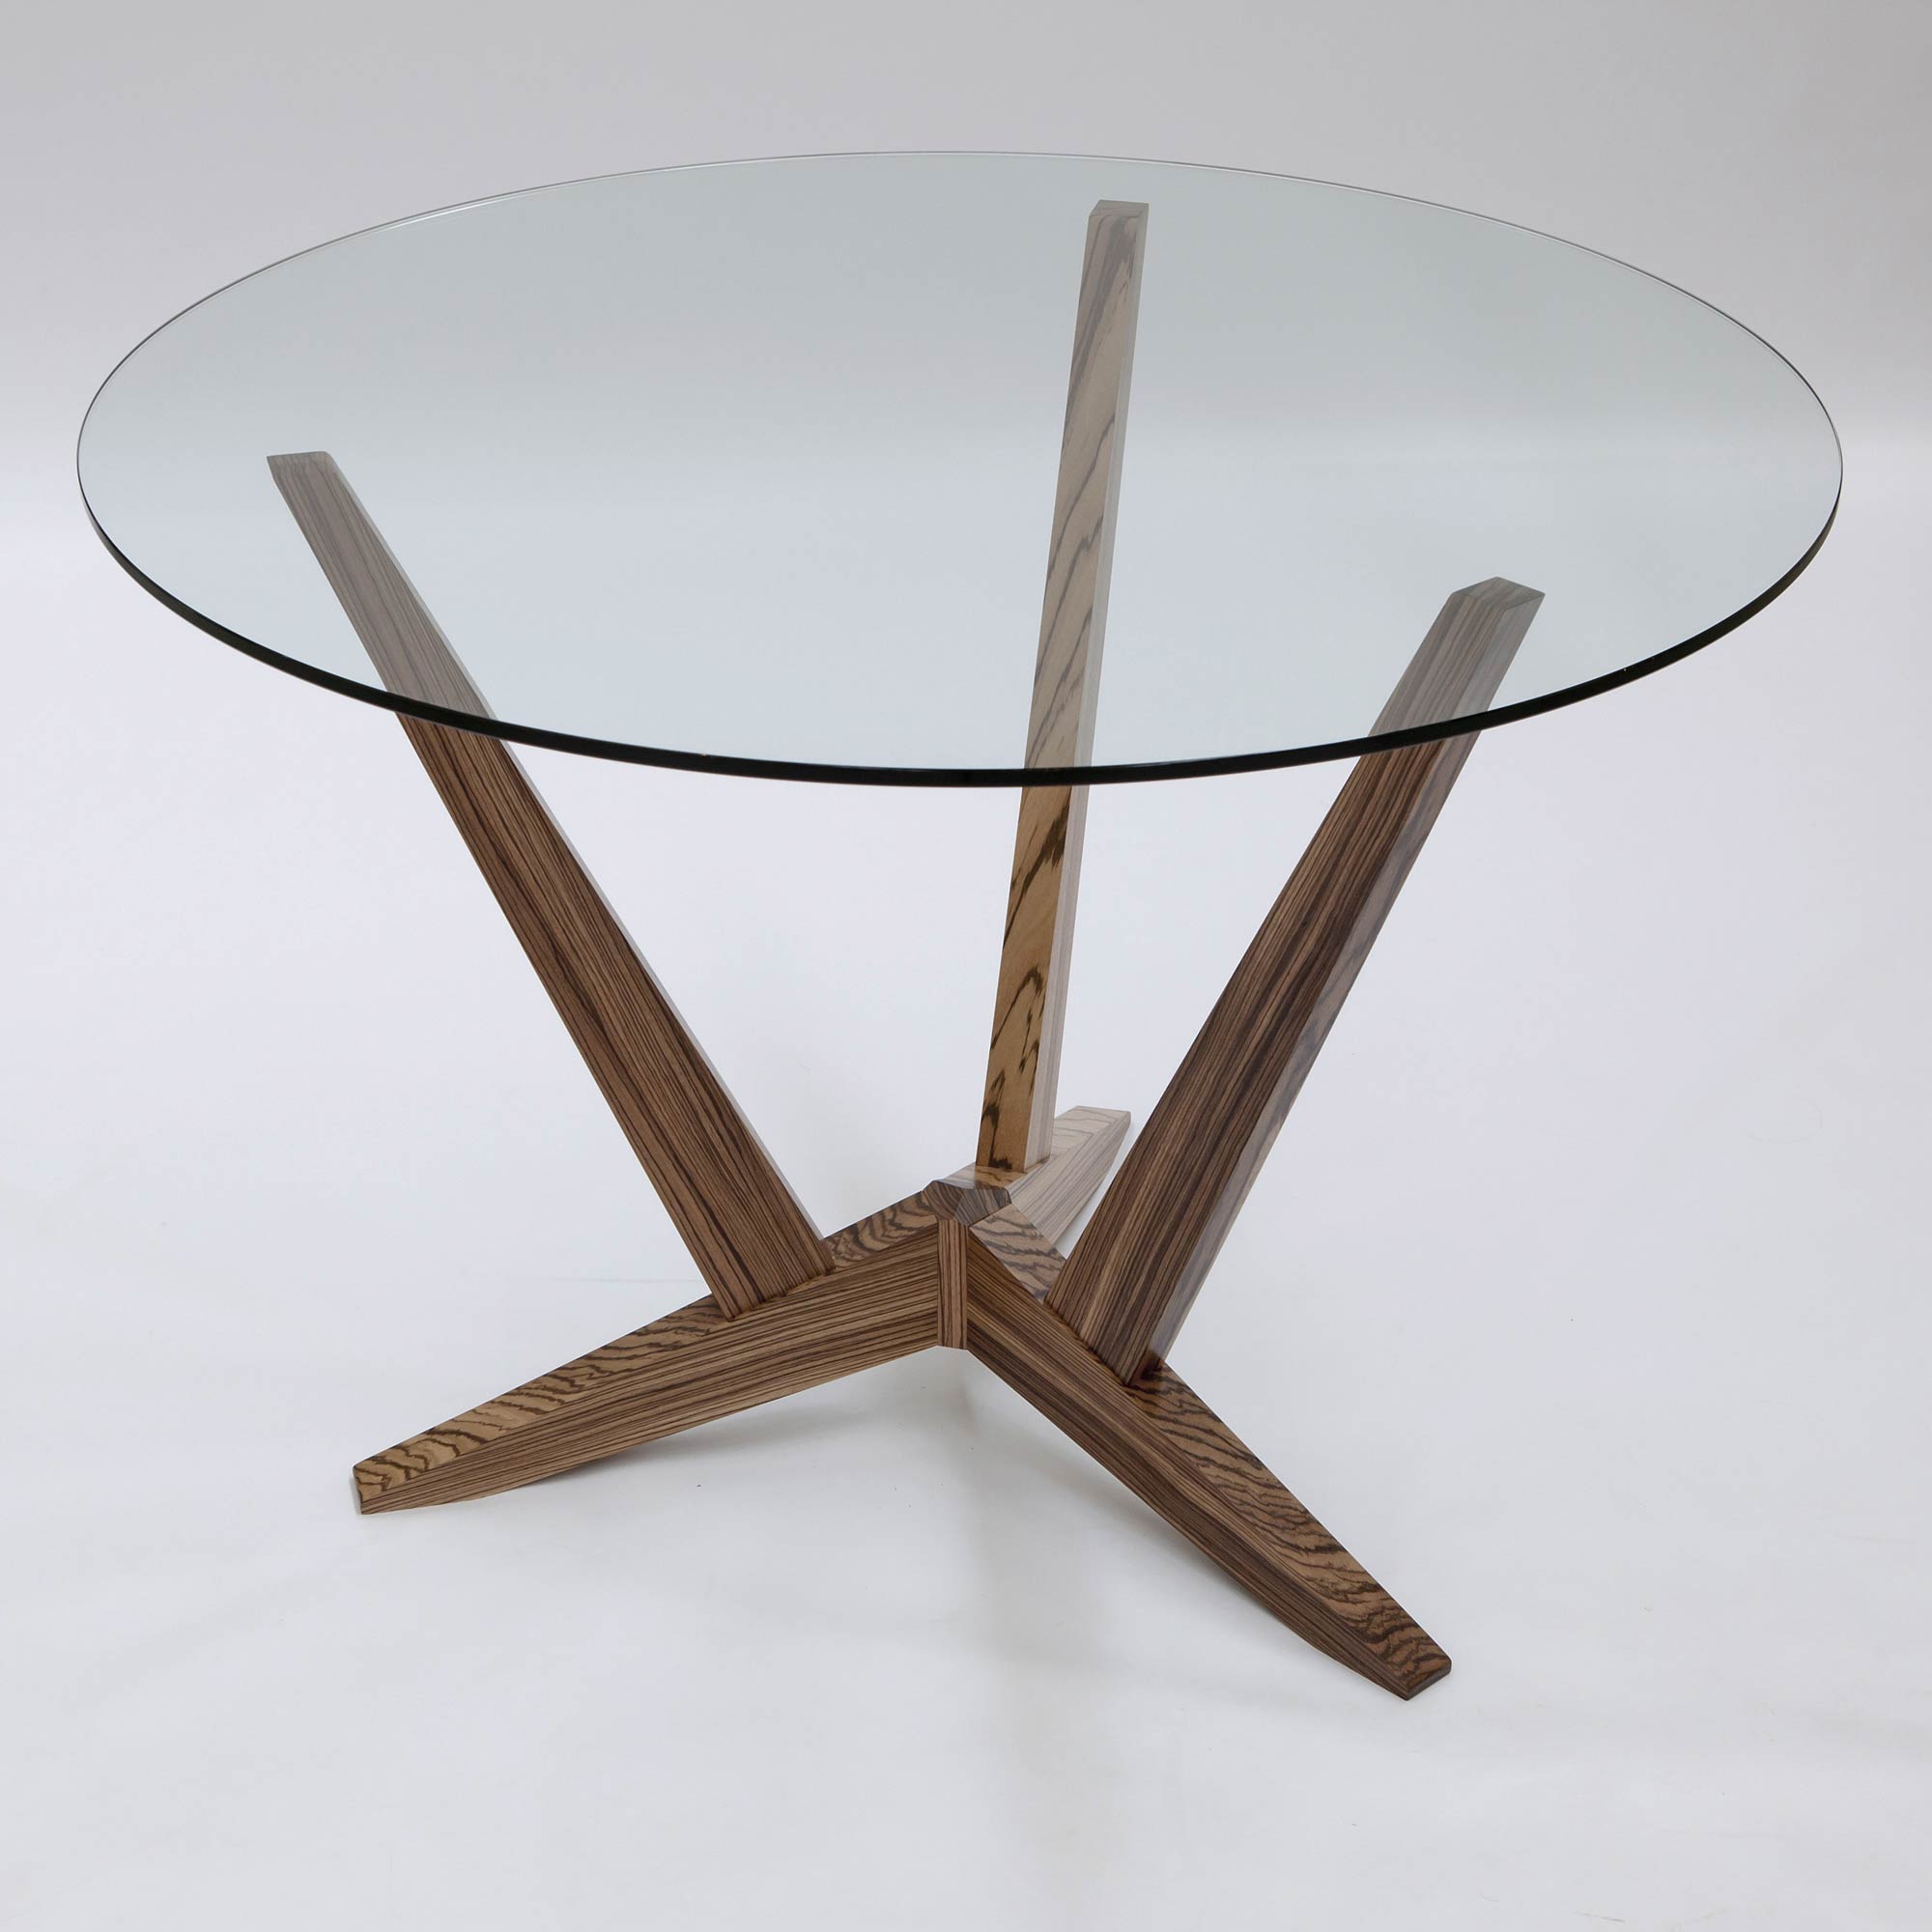 Bespoke glass top dining table | Makers' Eye